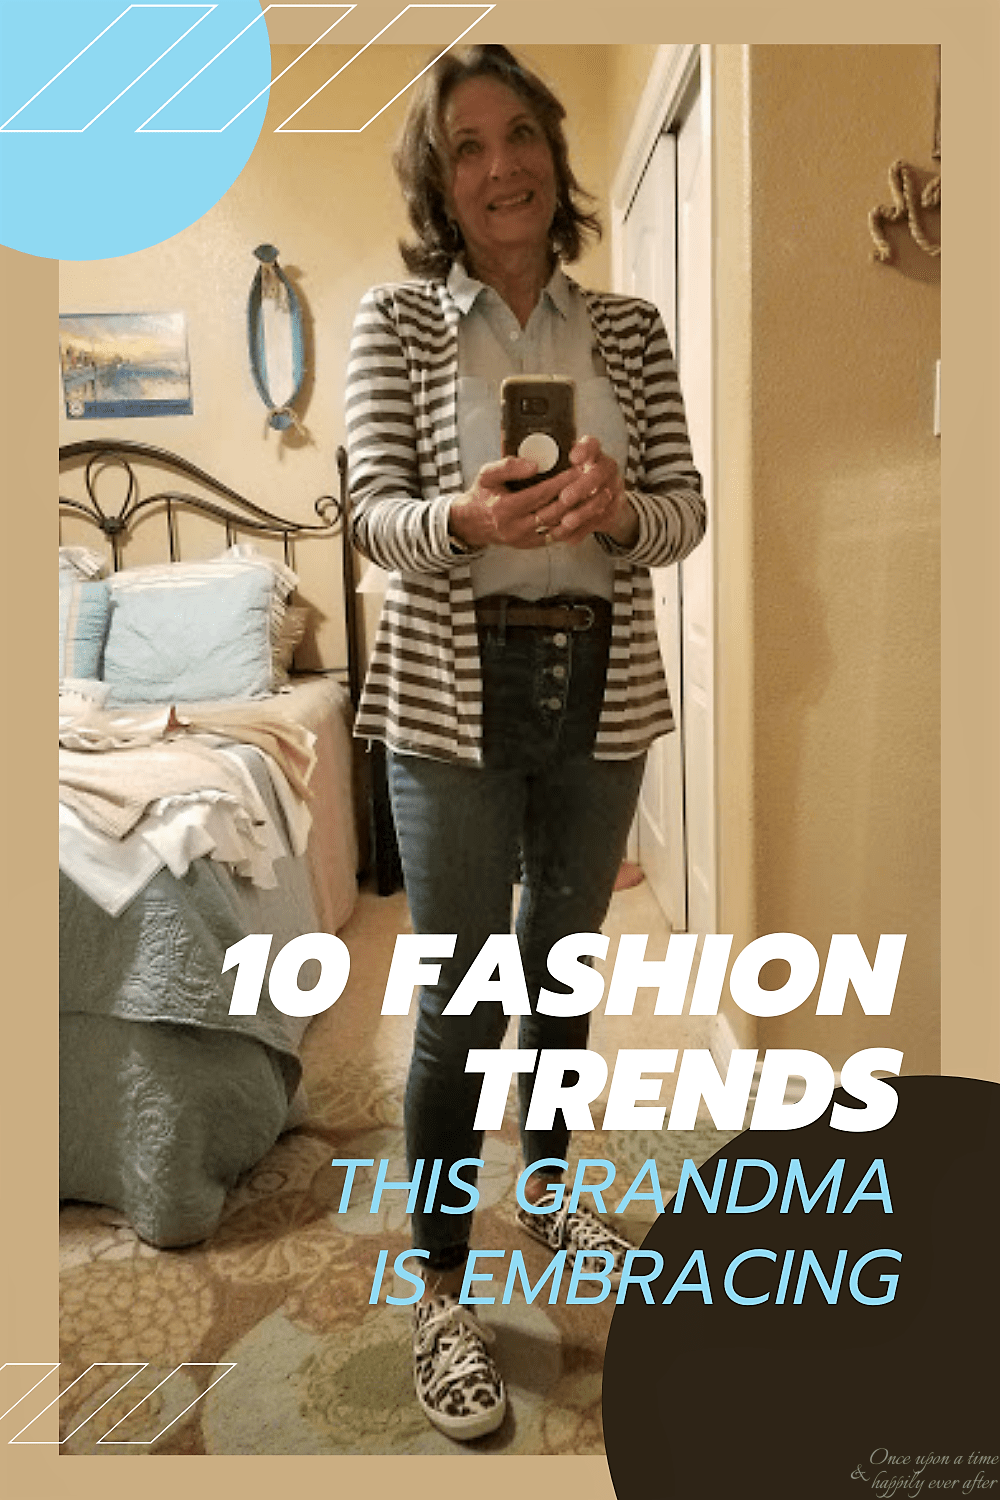 How to Style a White Jumpsuit, From Grandma with Love